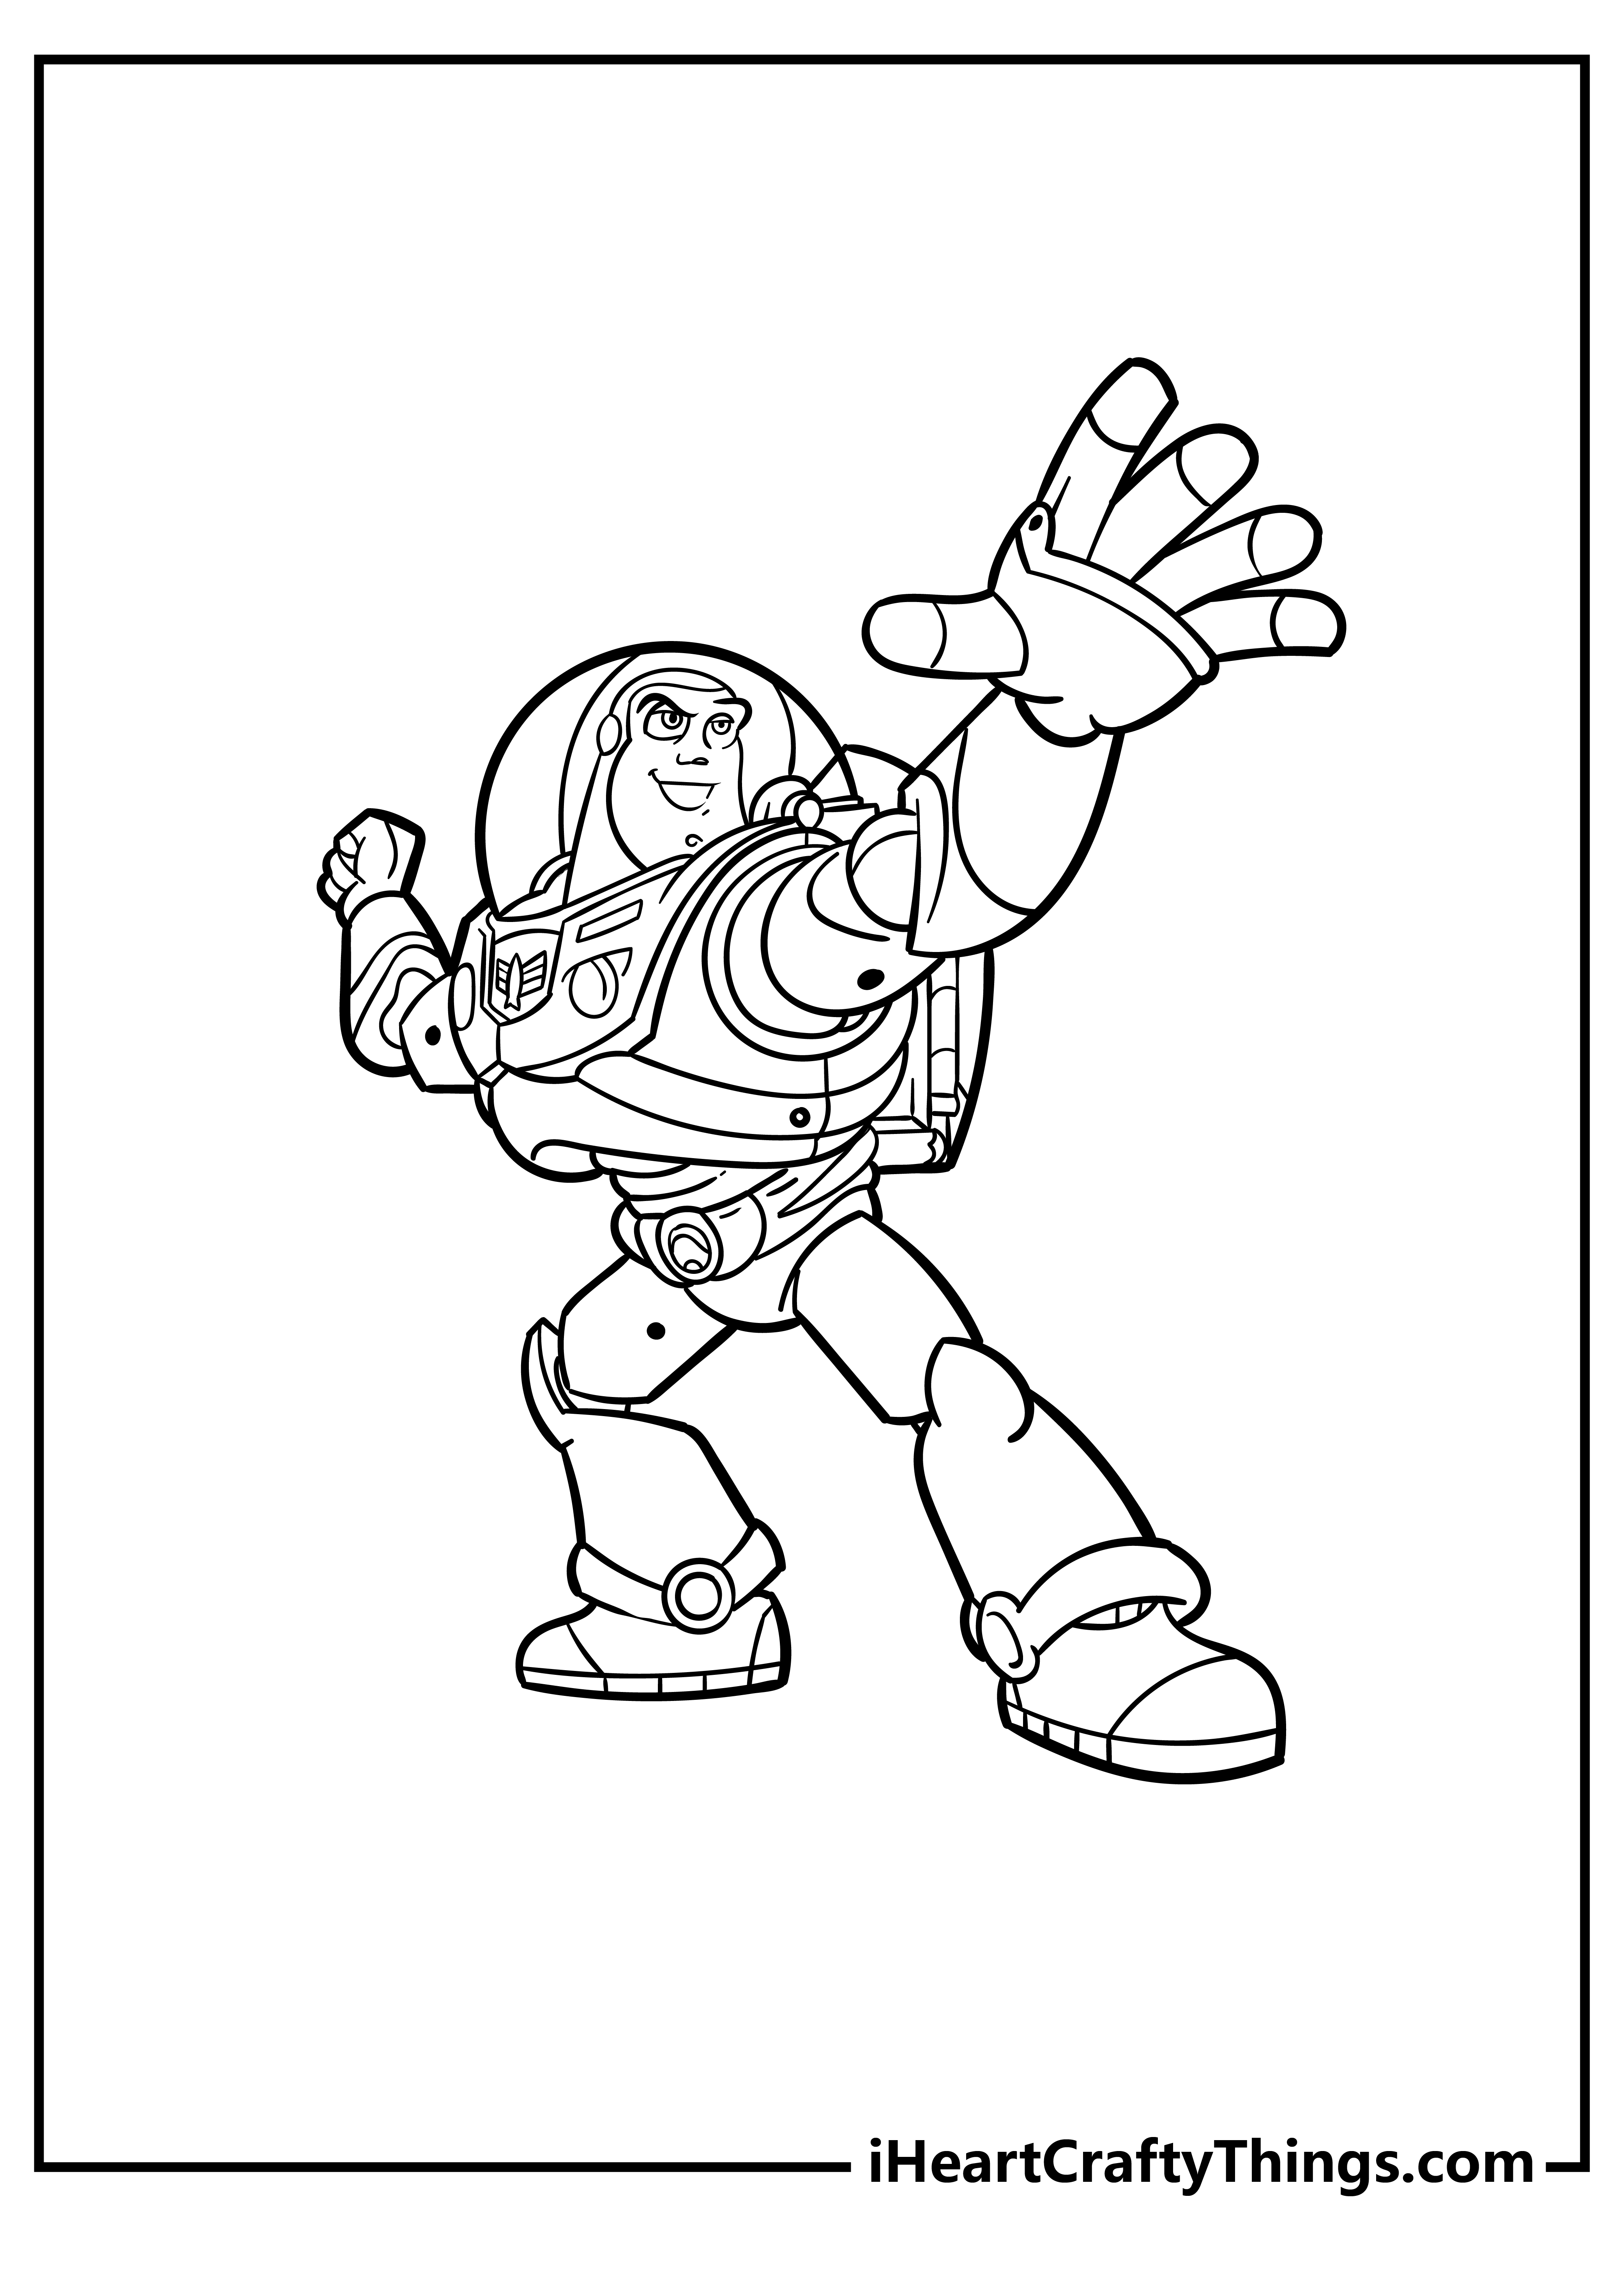 Buzz Lightyear Cartoon Coloring Pages for preschoolers free printable